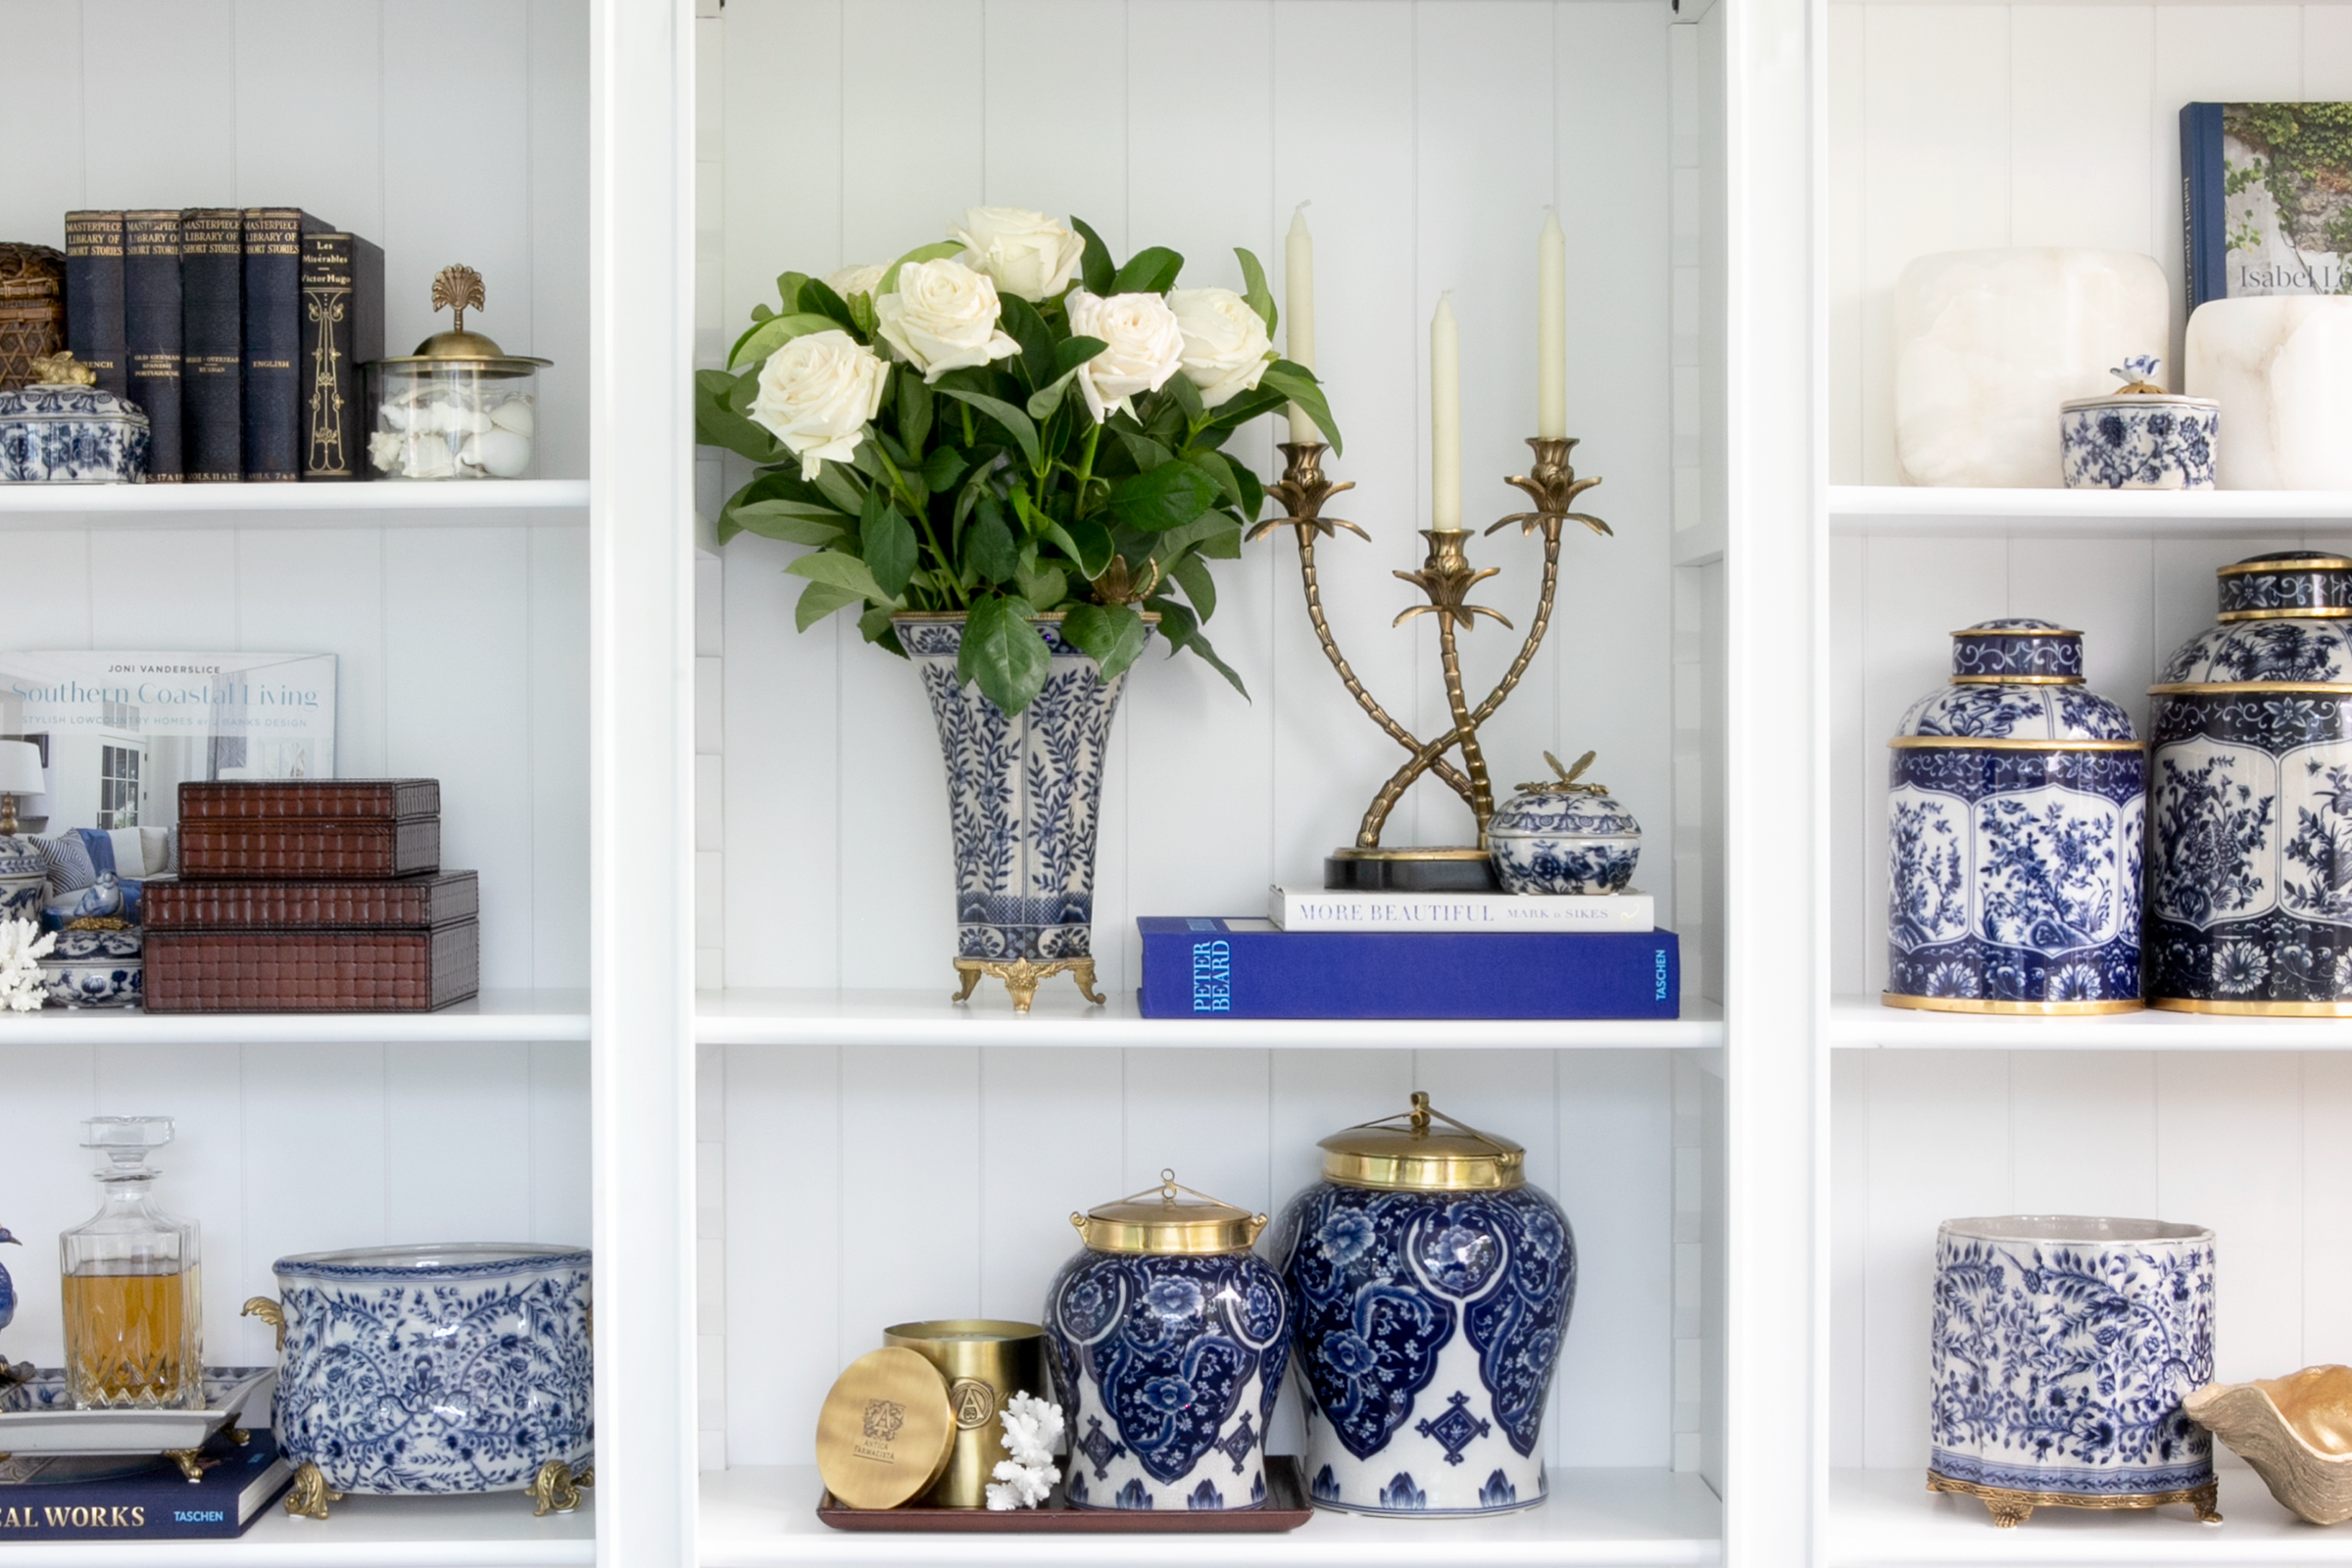 Decor gift ideas for Mother's day, styled on a bookshelf